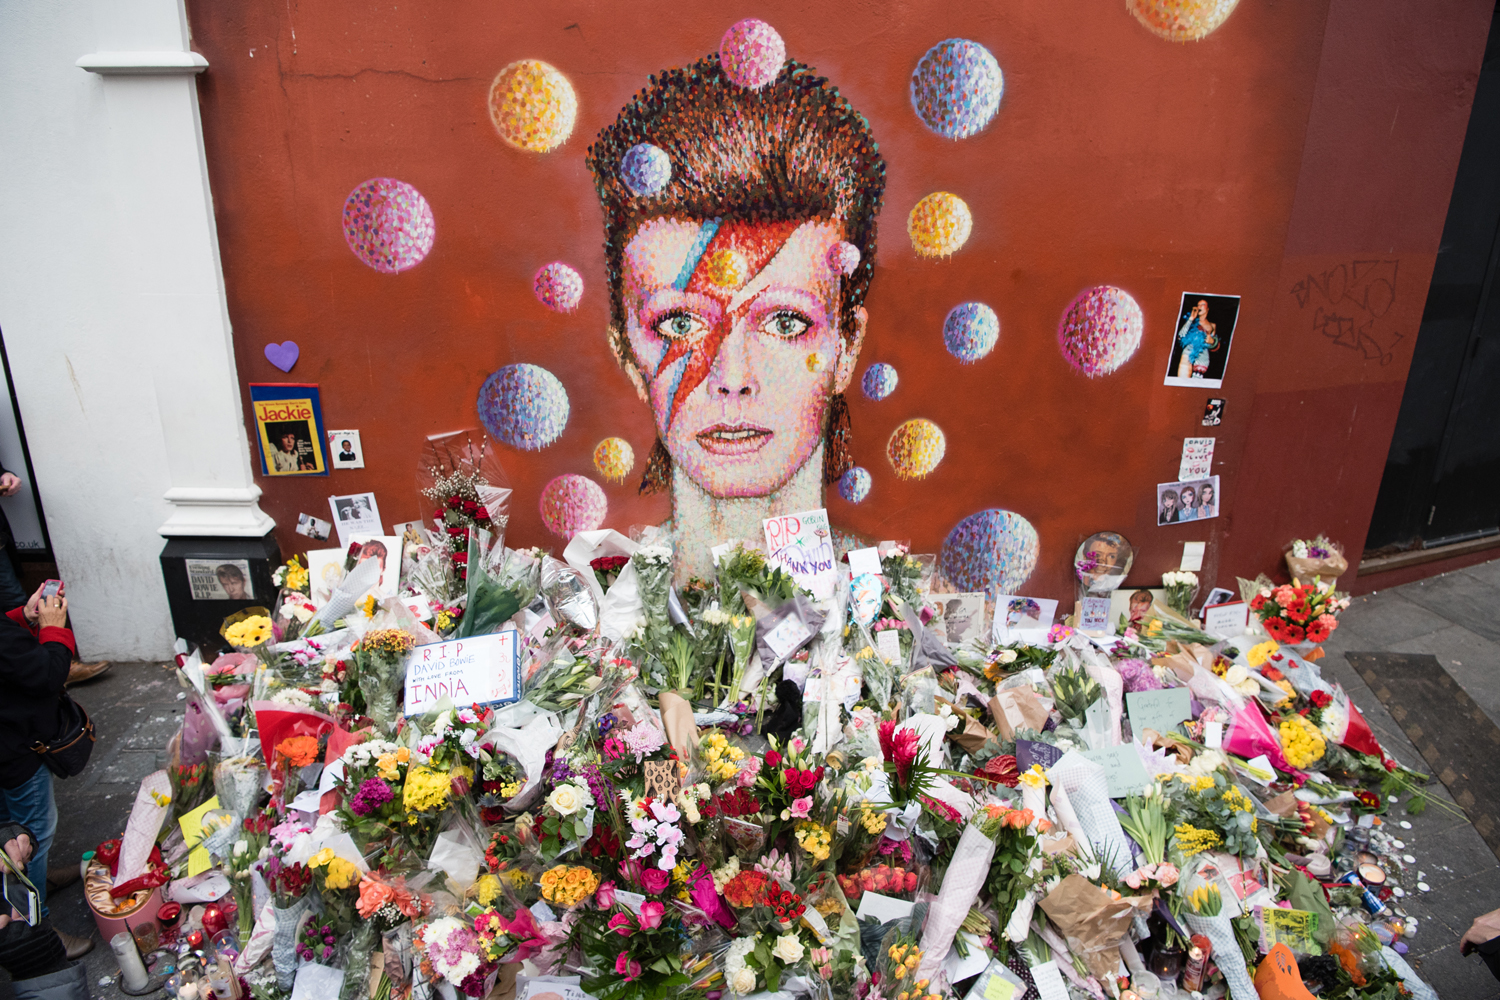 Floral tributes are seen beneath a mural of British singer David Bowie, painted by Australian street artist James Cochran, aka Jimmy C, the day after the announcement of Bowie's death, in Brixton, south London, on January 12, 2016. Music legend David Bowie was famously private during his lifetime -- and in death, as a string of questions about the circumstances of his passing remained unanswered. His official social media accounts had announced the shock news of his death at 69 on January 11, 2016: "David Bowie died peacefully today surrounded by his family after a courageous 18-month battle with cancer," adding a request for privacy for the grieving family. / AFP / LEON NEAL